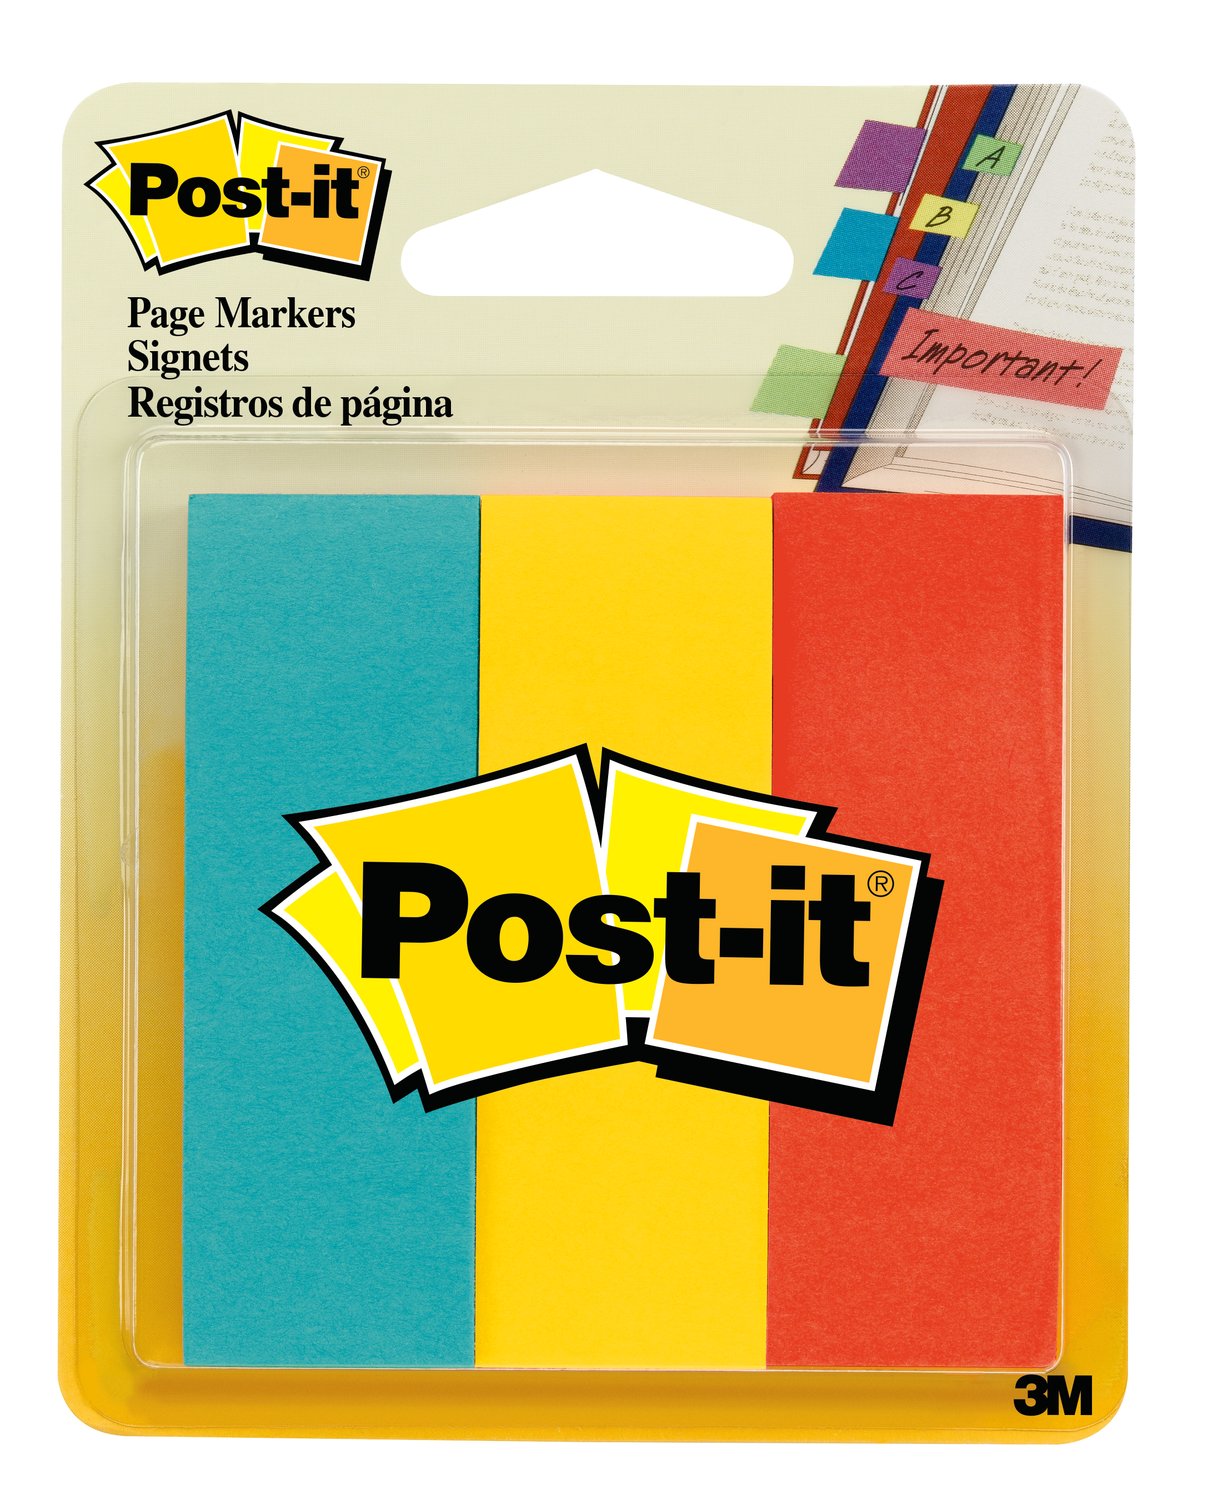 7010333419 - Post-it Page Markers 5222, 1 in x 3 in x in (22,2 mm x 73 mm), Assorted
Colors, 3 Pads/Pack, 50 Sheets/Pad